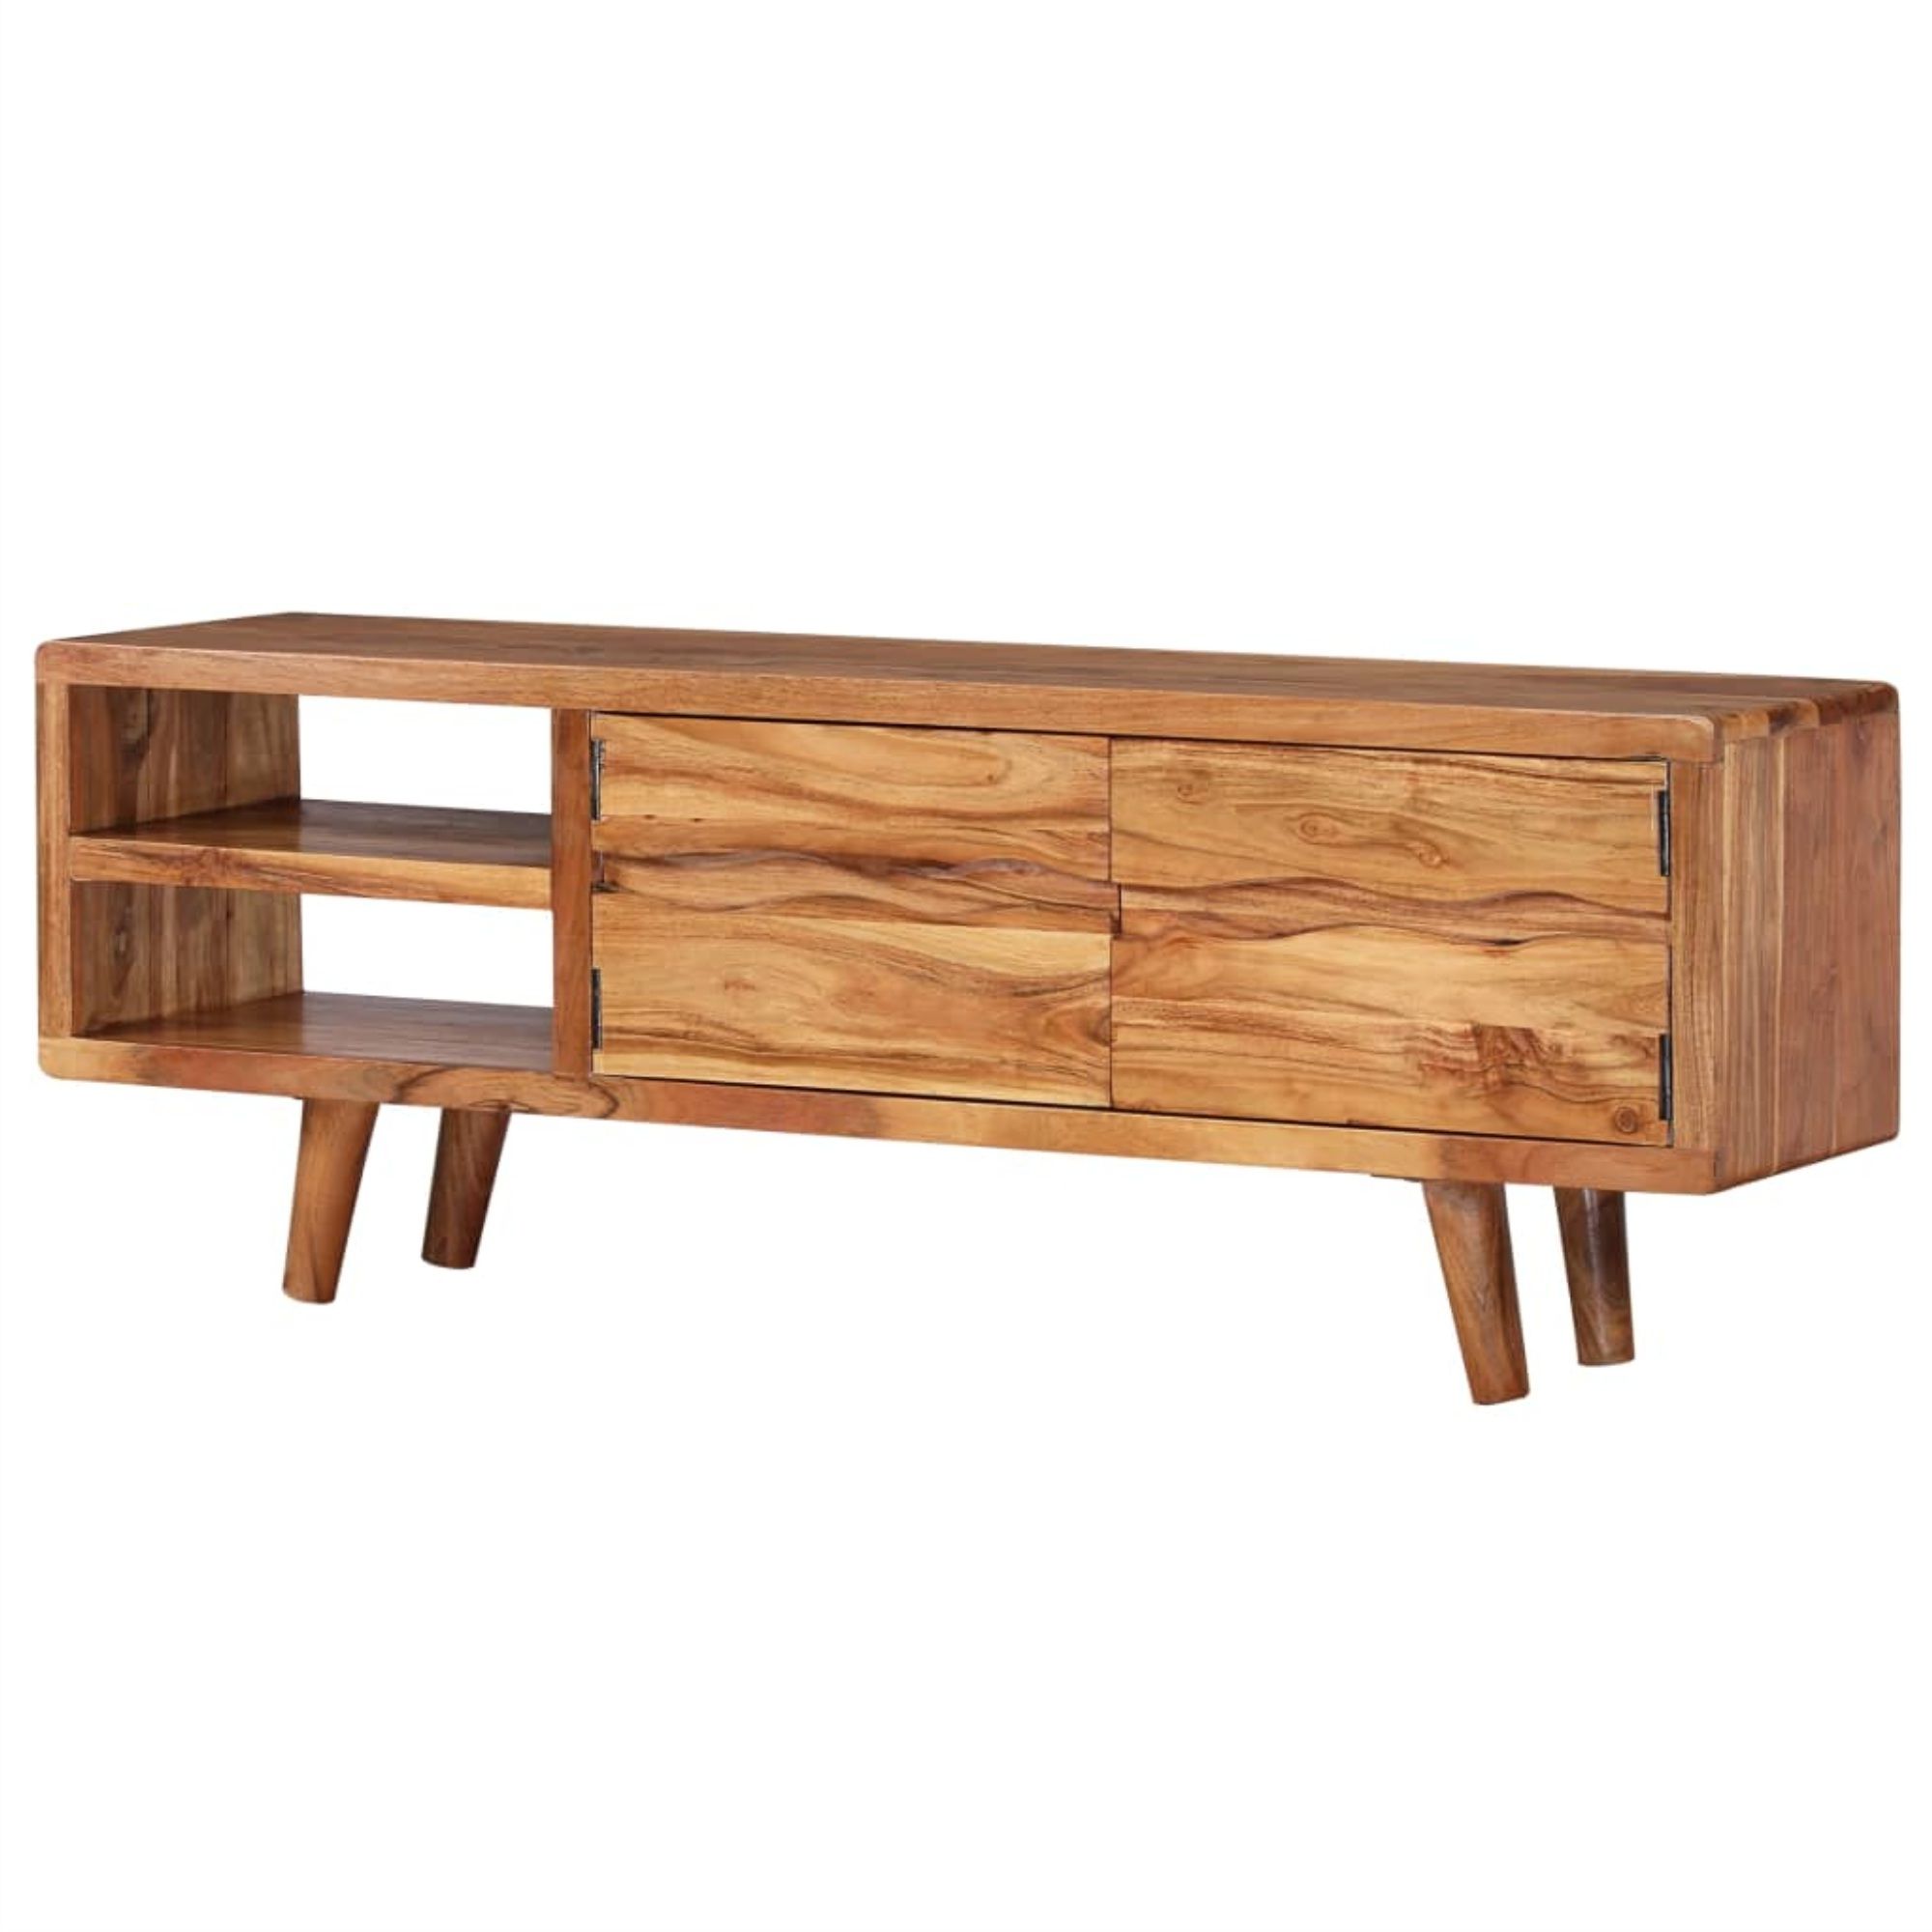 Trendy Vidaxl Tv Cabinet Solid Acacia Wood With Carved Doors 46.1"x11.8"x (View 4 of 10)